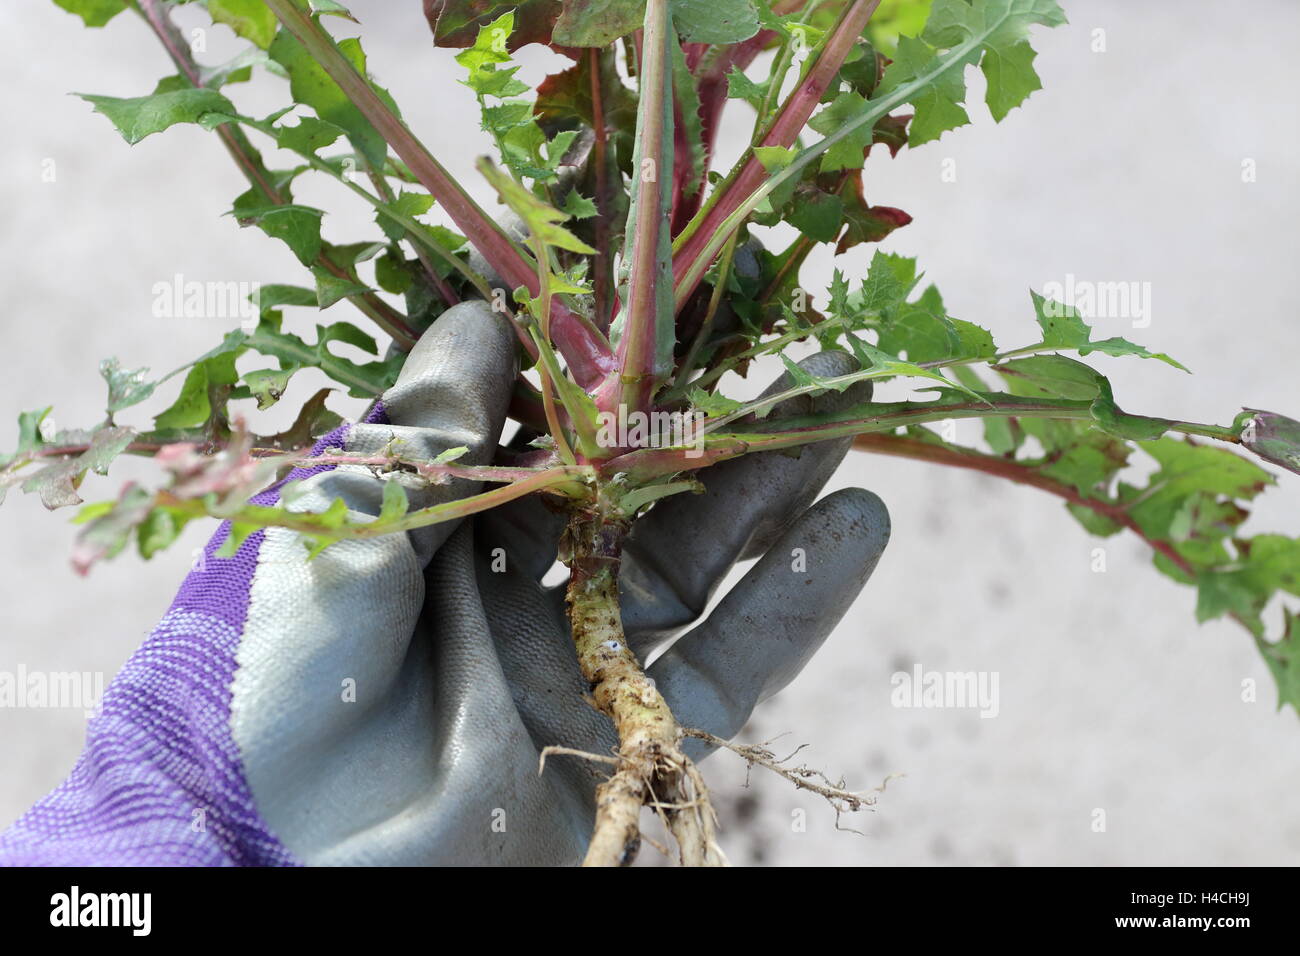 Hand holding Lactuca serriola or also known as Prickly Lettuce Stock Photo